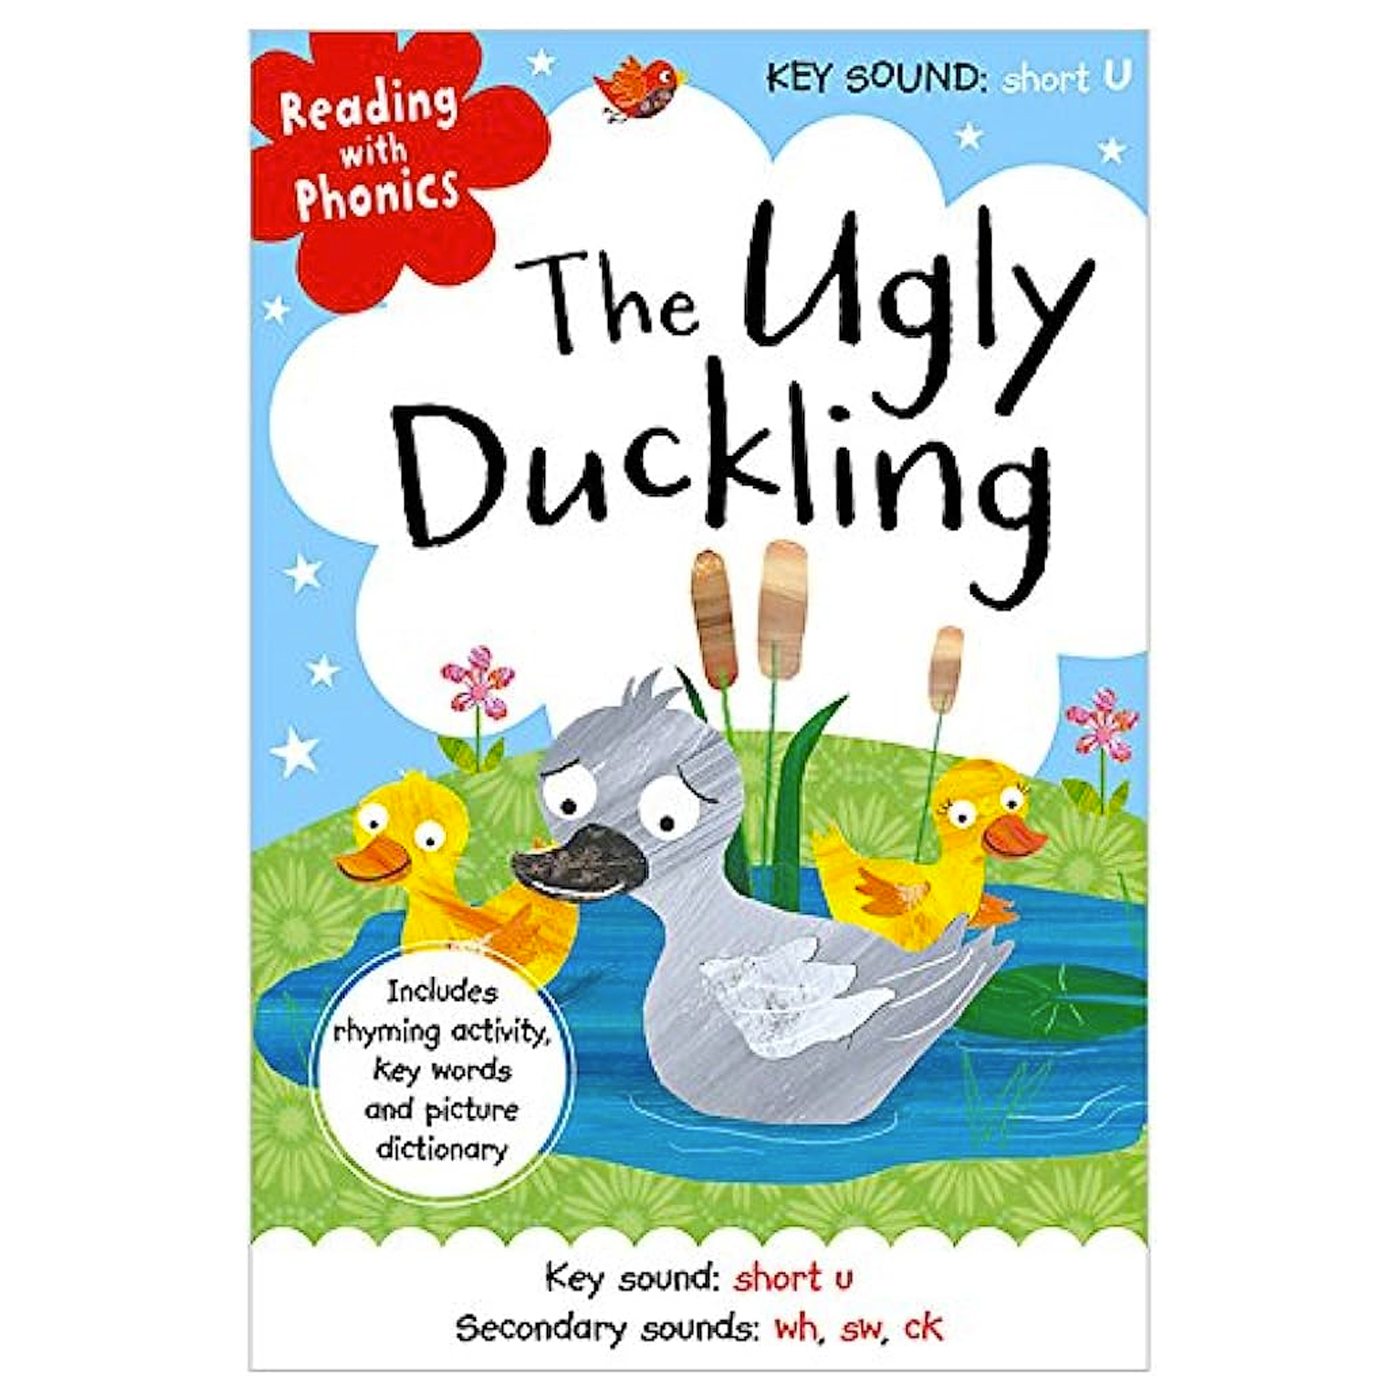 MAKE BELIEVE IDEAS Reading with Phonics The Ugly Duckling